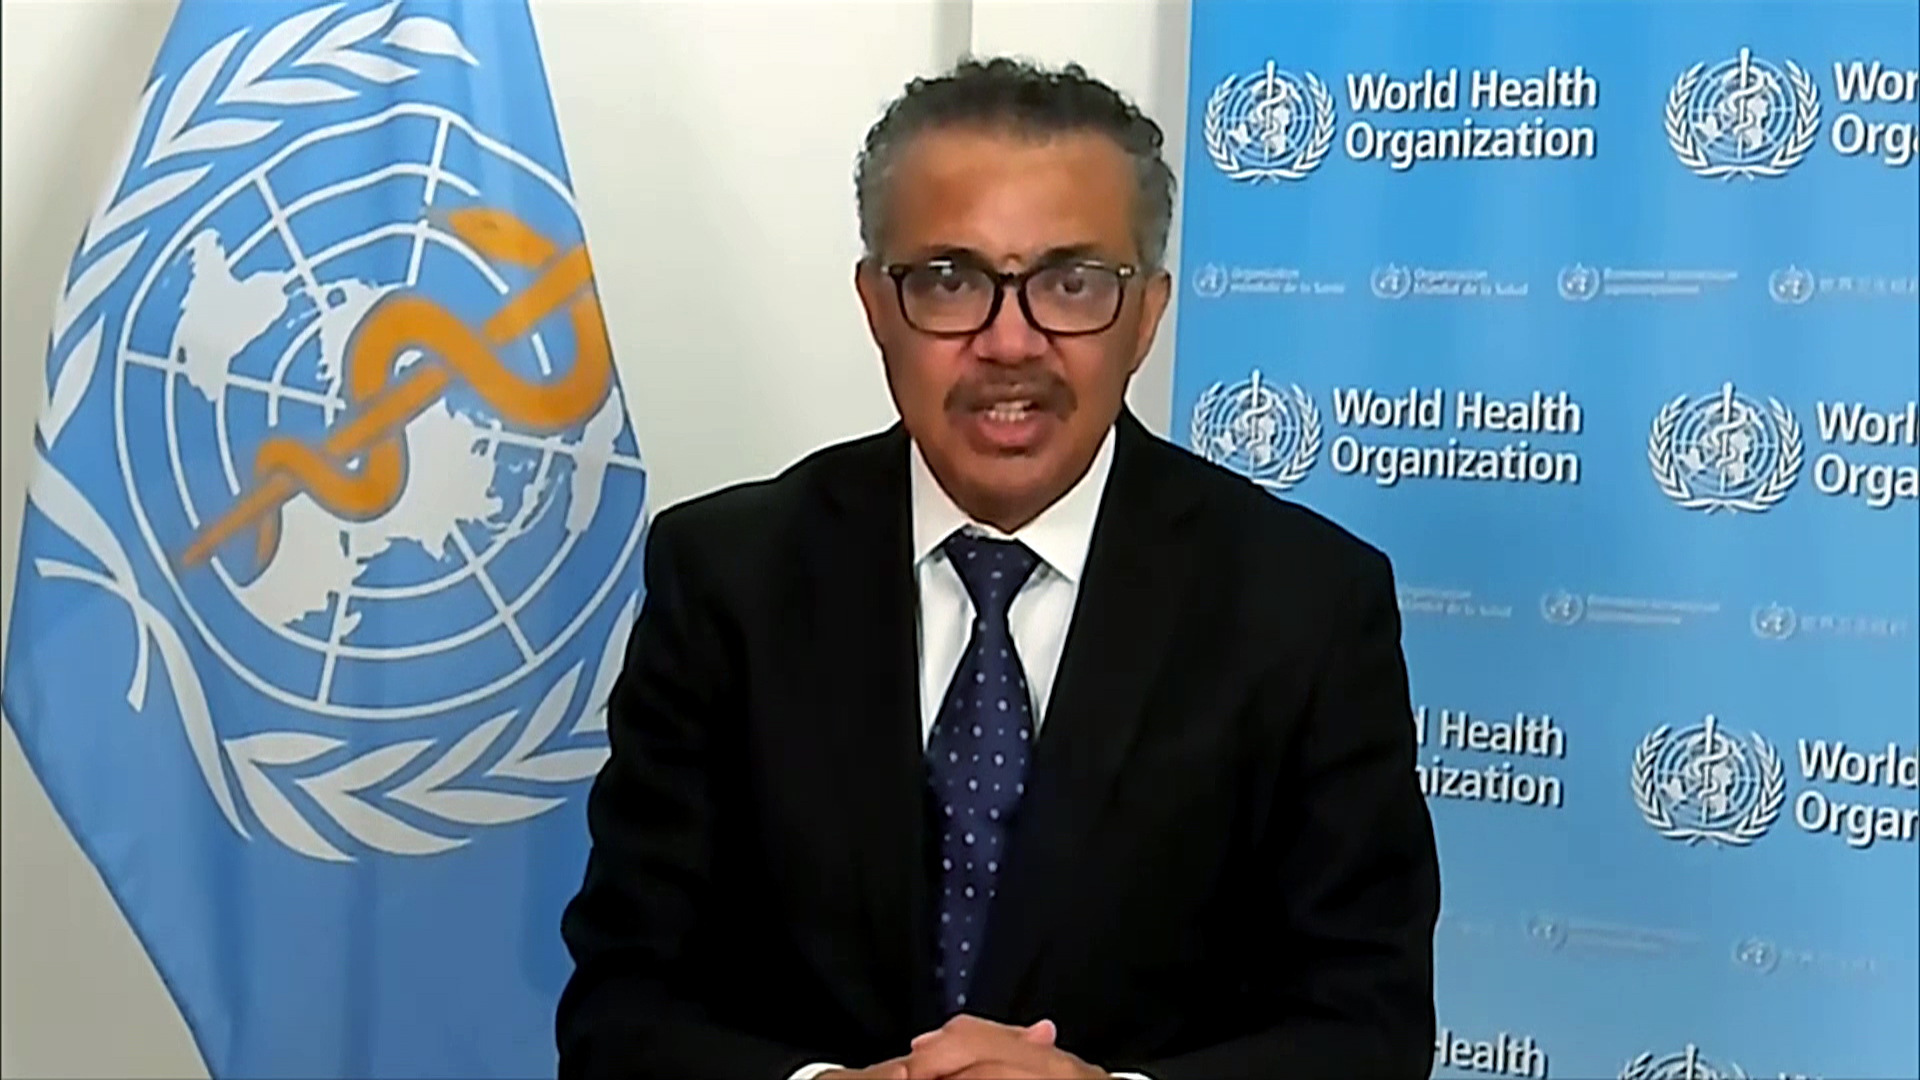 Dr. Tedros Adhanom Ghebreyesus, Director-General of the World Health Organisation (WHO), speaks during the inauguration of the National Institute of Ayurveda in Jaipur (Rajasthan), via video conference in New Delhi, in November 2020